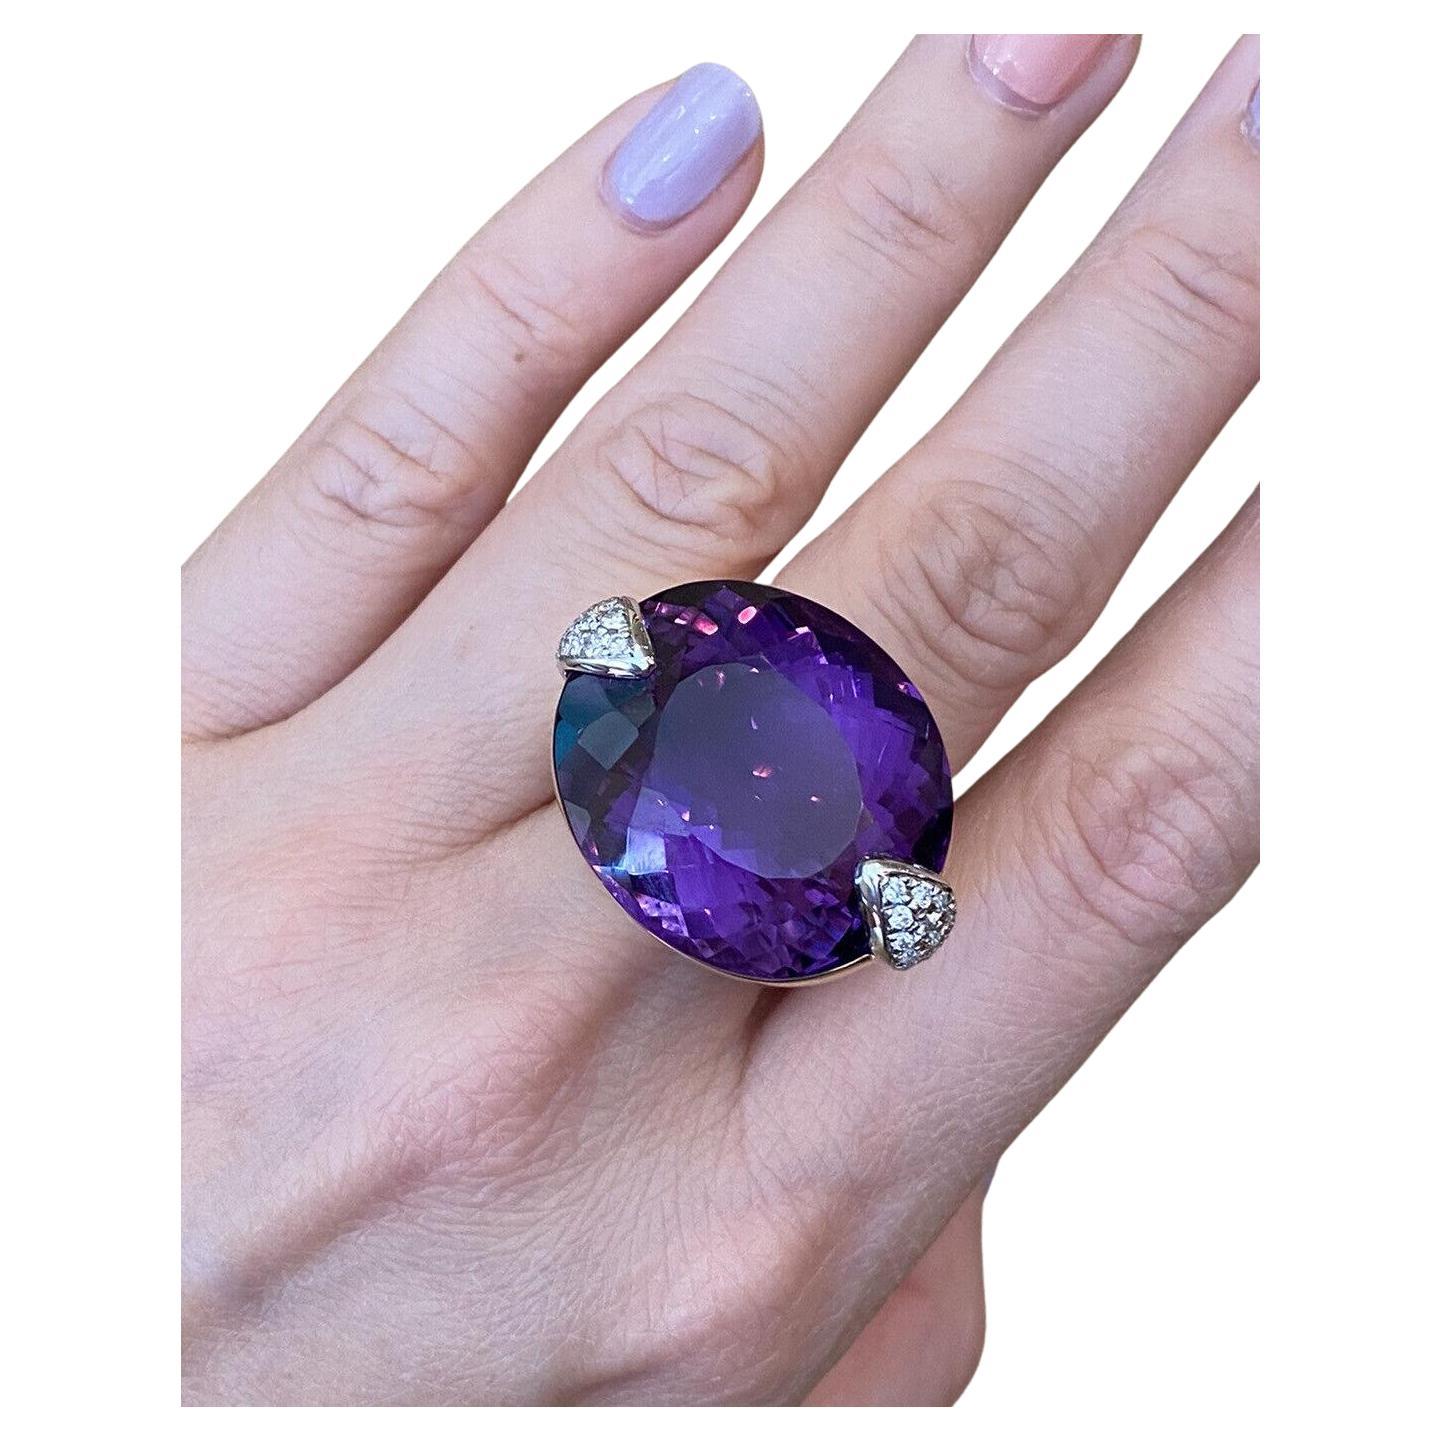 Large 54.03 carats Amethyst and Diamond Cocktail Ring in Platinum and 18k Gold For Sale